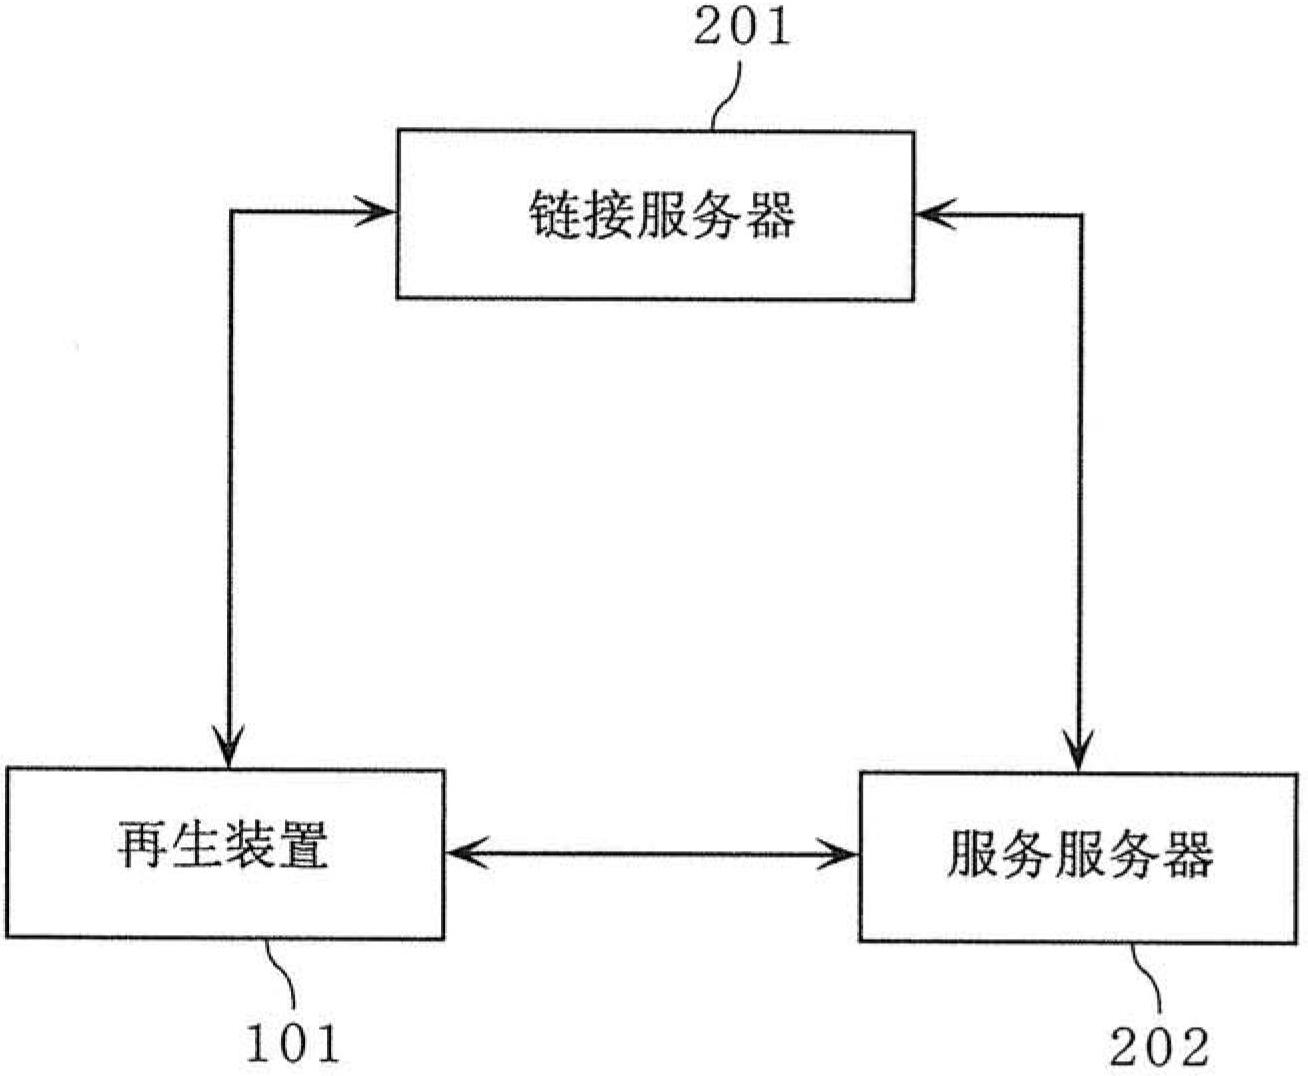 Format conversion server, reproduction device and information reproduction system